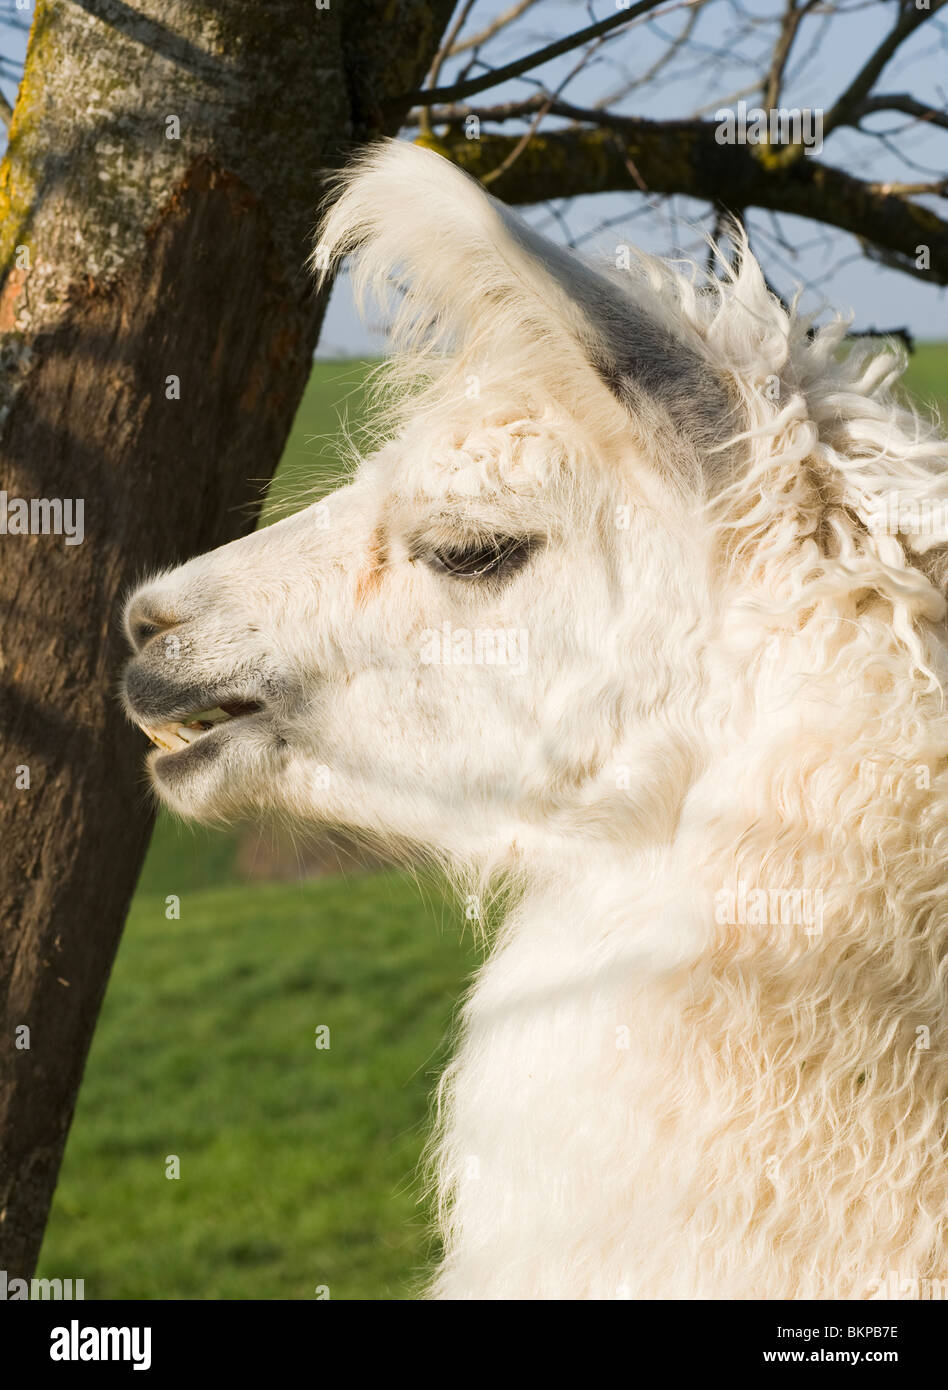 Closeup of a Llamas Head and Face with Ears Pricked Up in a Field in Laval Aveyron France Stock Photo